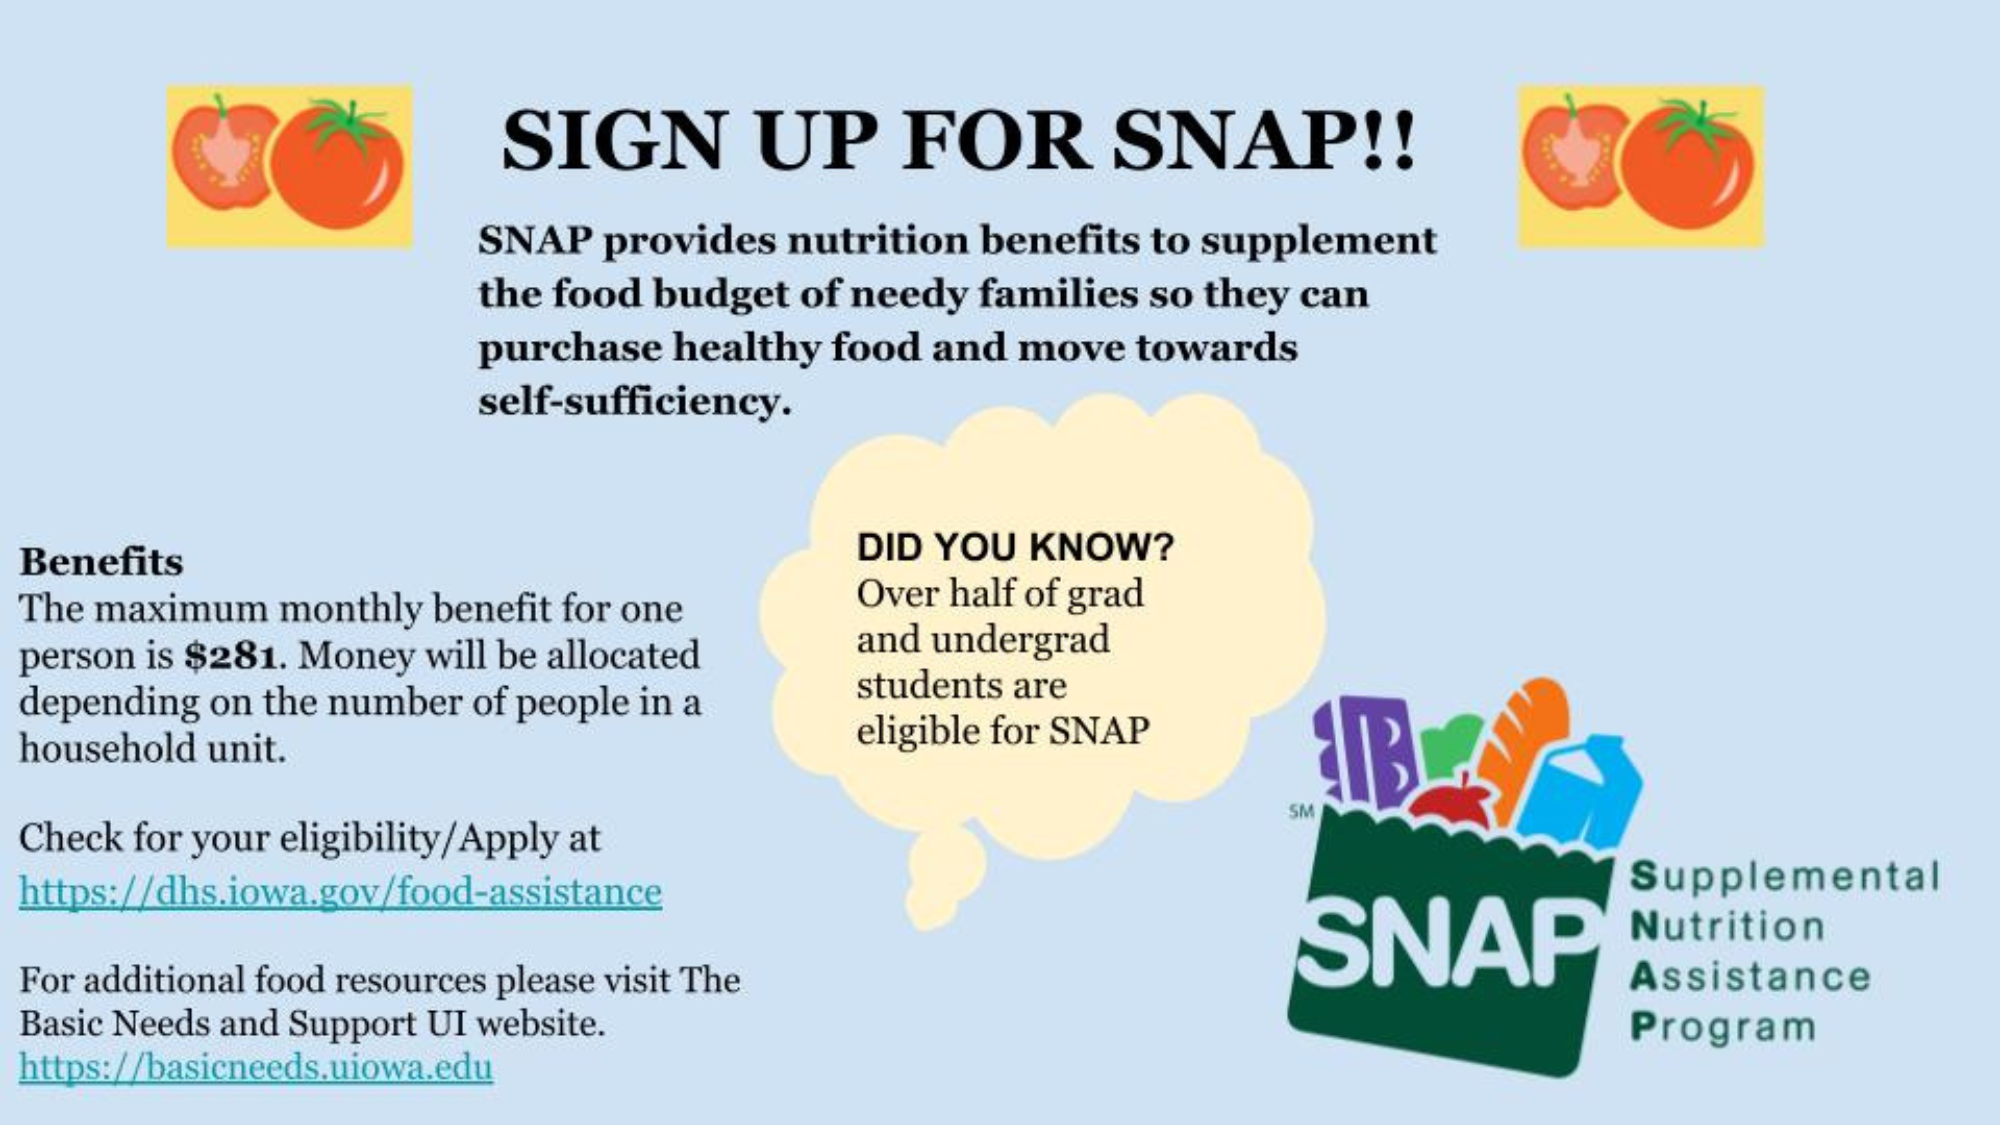 blue background with informations about SNAP the federal/state assistance program that helps combat food insecurity. Over half of students at Iowa are eligible and can apply at https://dhs.iowa.gov/food-assistance